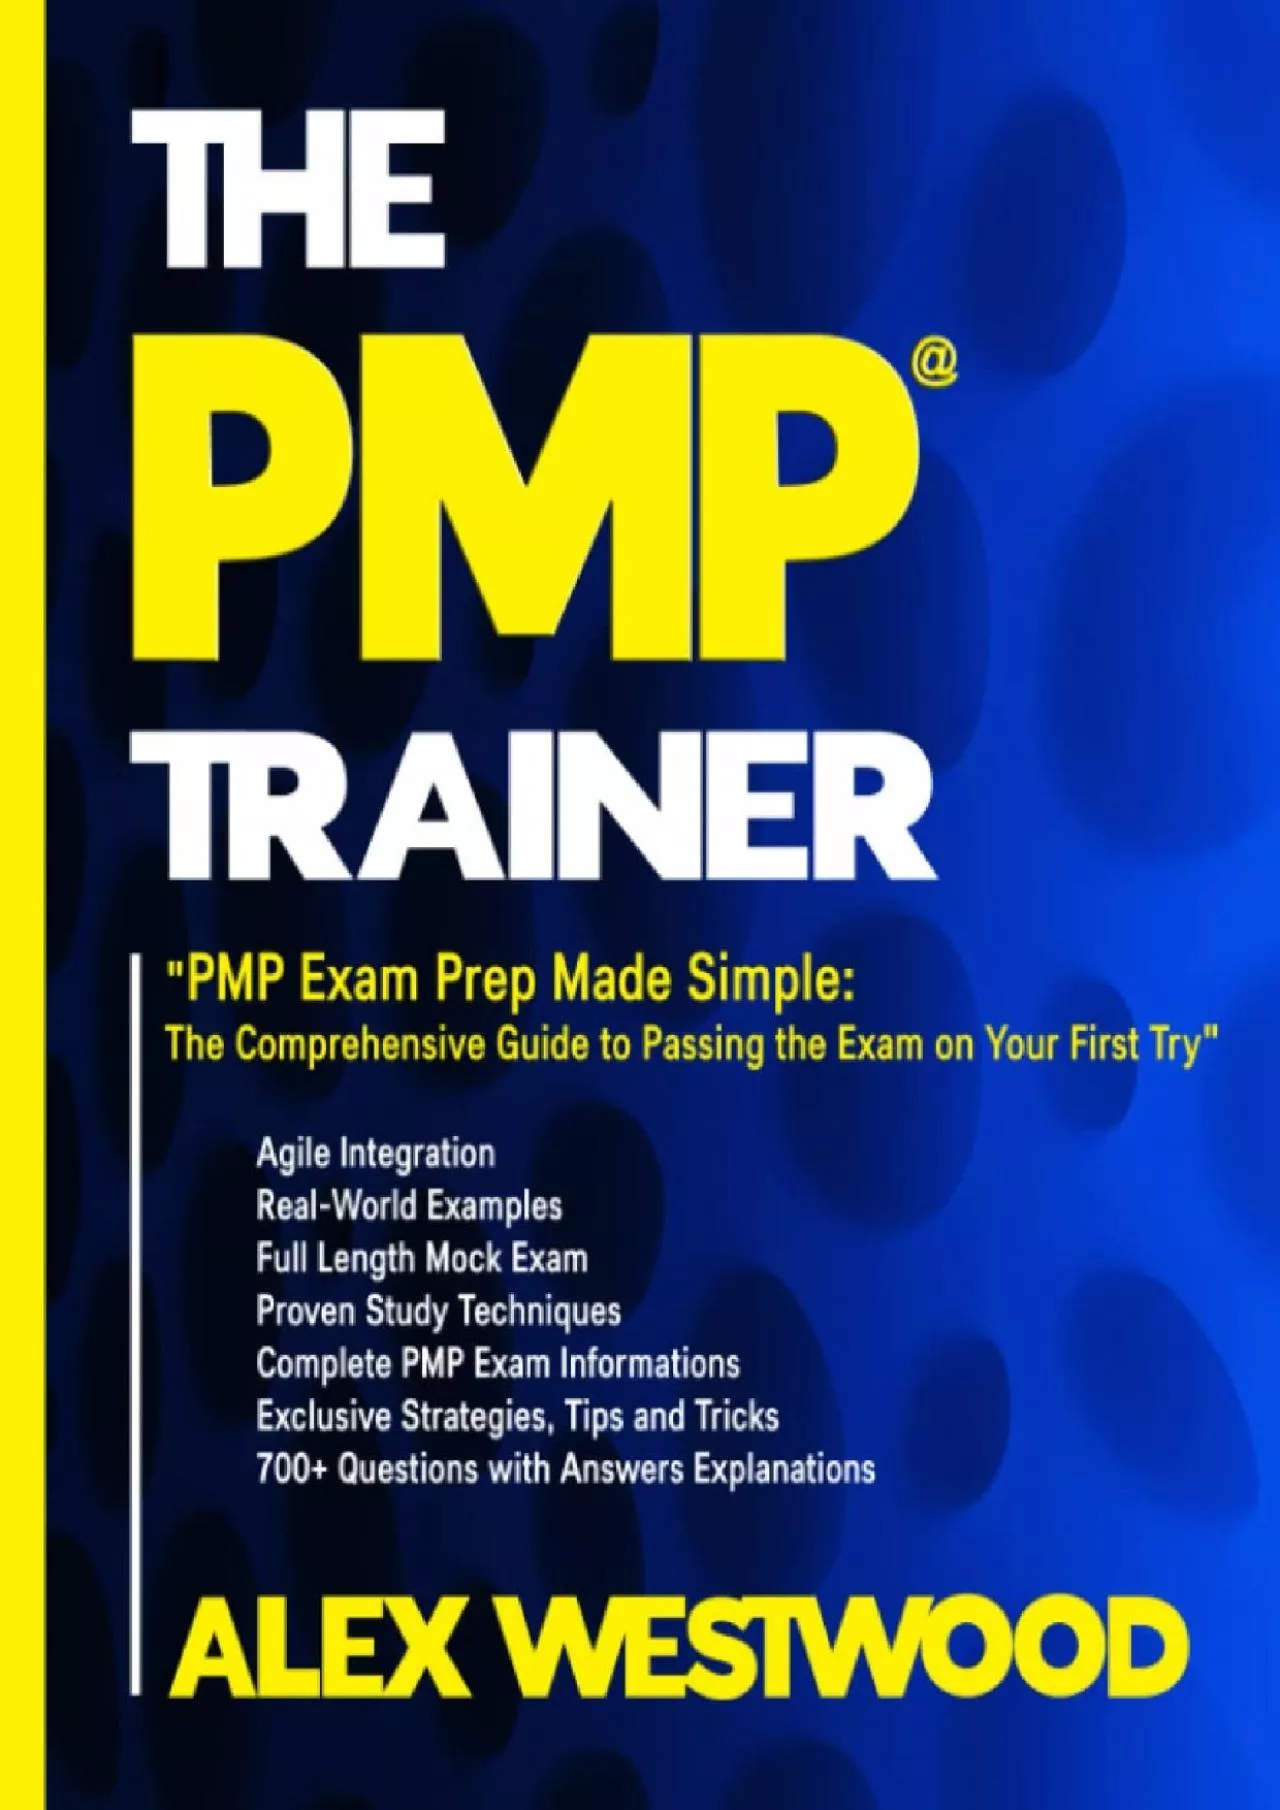 [EBOOK] PMP Exam Prep Made Simple: The Comprehensive Guide to Passing the Exam on Your